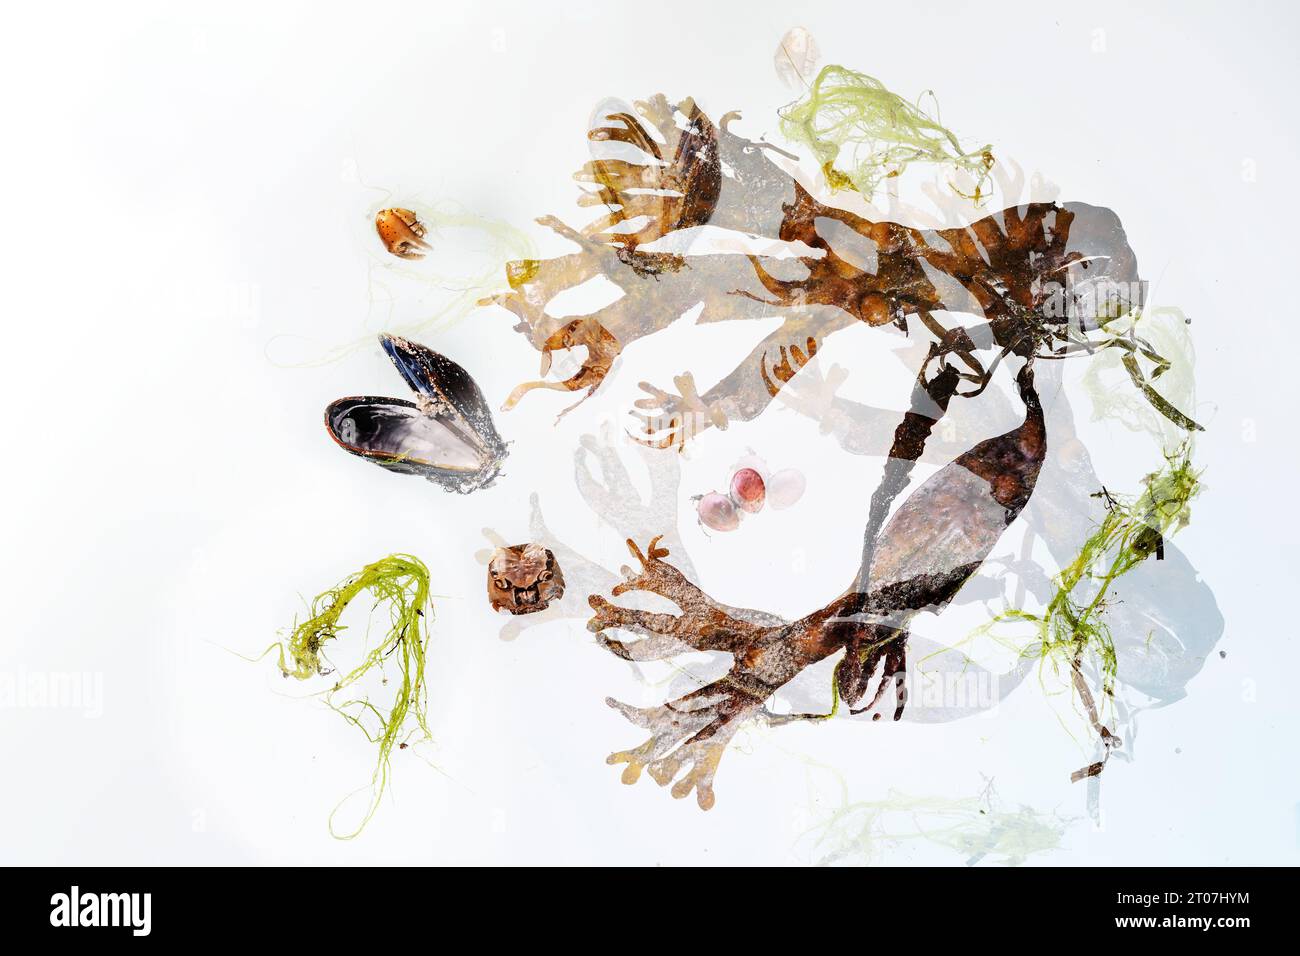 Abstract composition of seaweed, shells, sand and stranded goods as double exposure on a light background, concept for environmental protection of sea Stock Photo